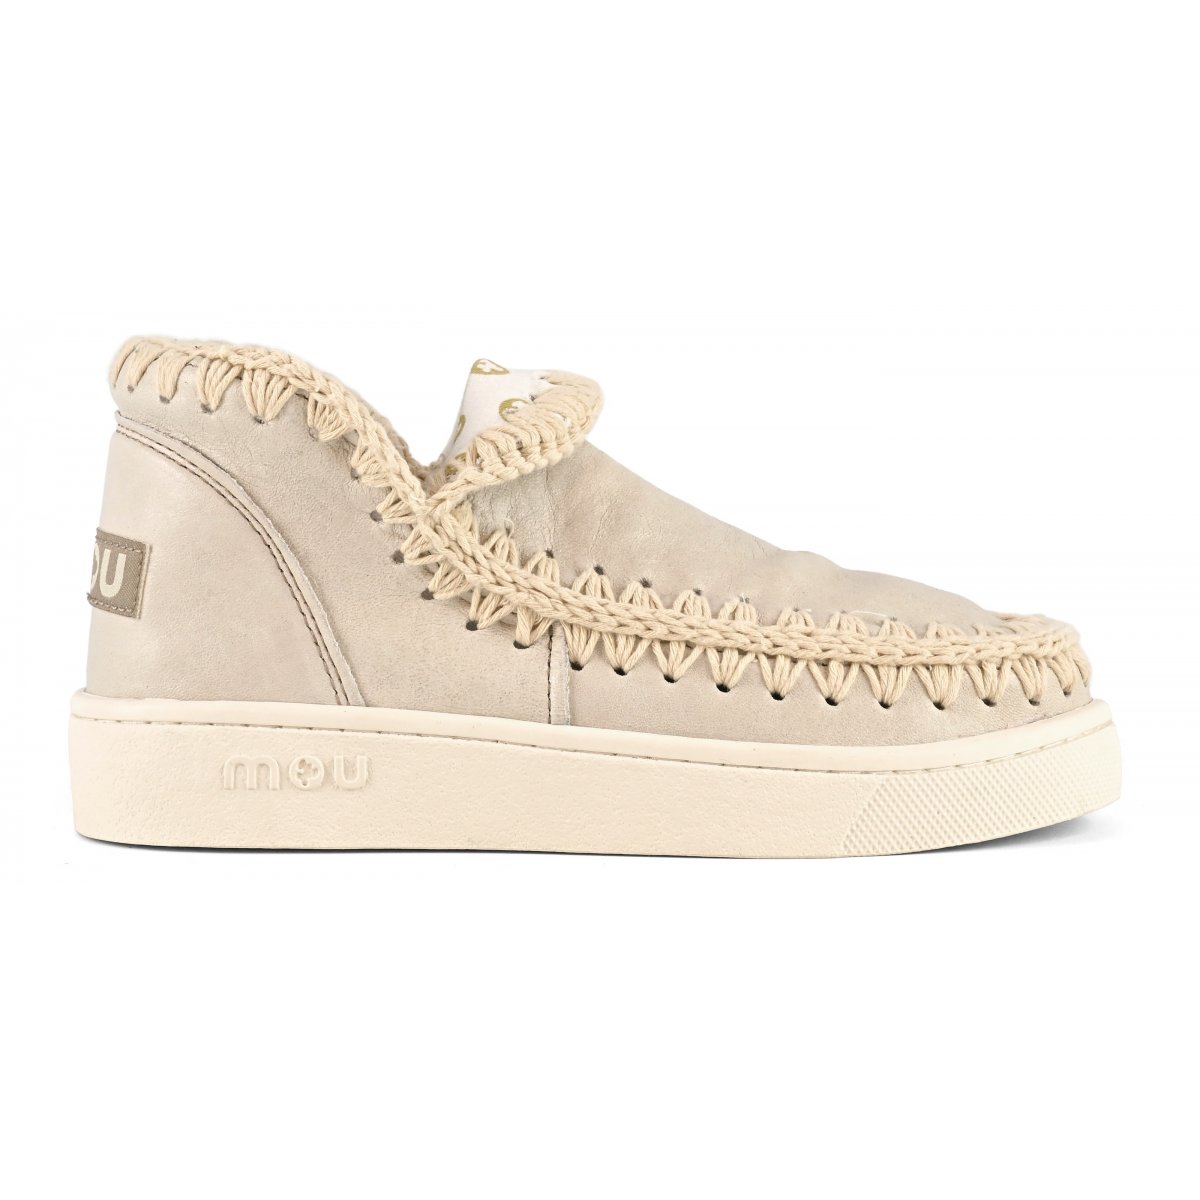 Summer Eskimo sneaker special leathers CSWHI img 1